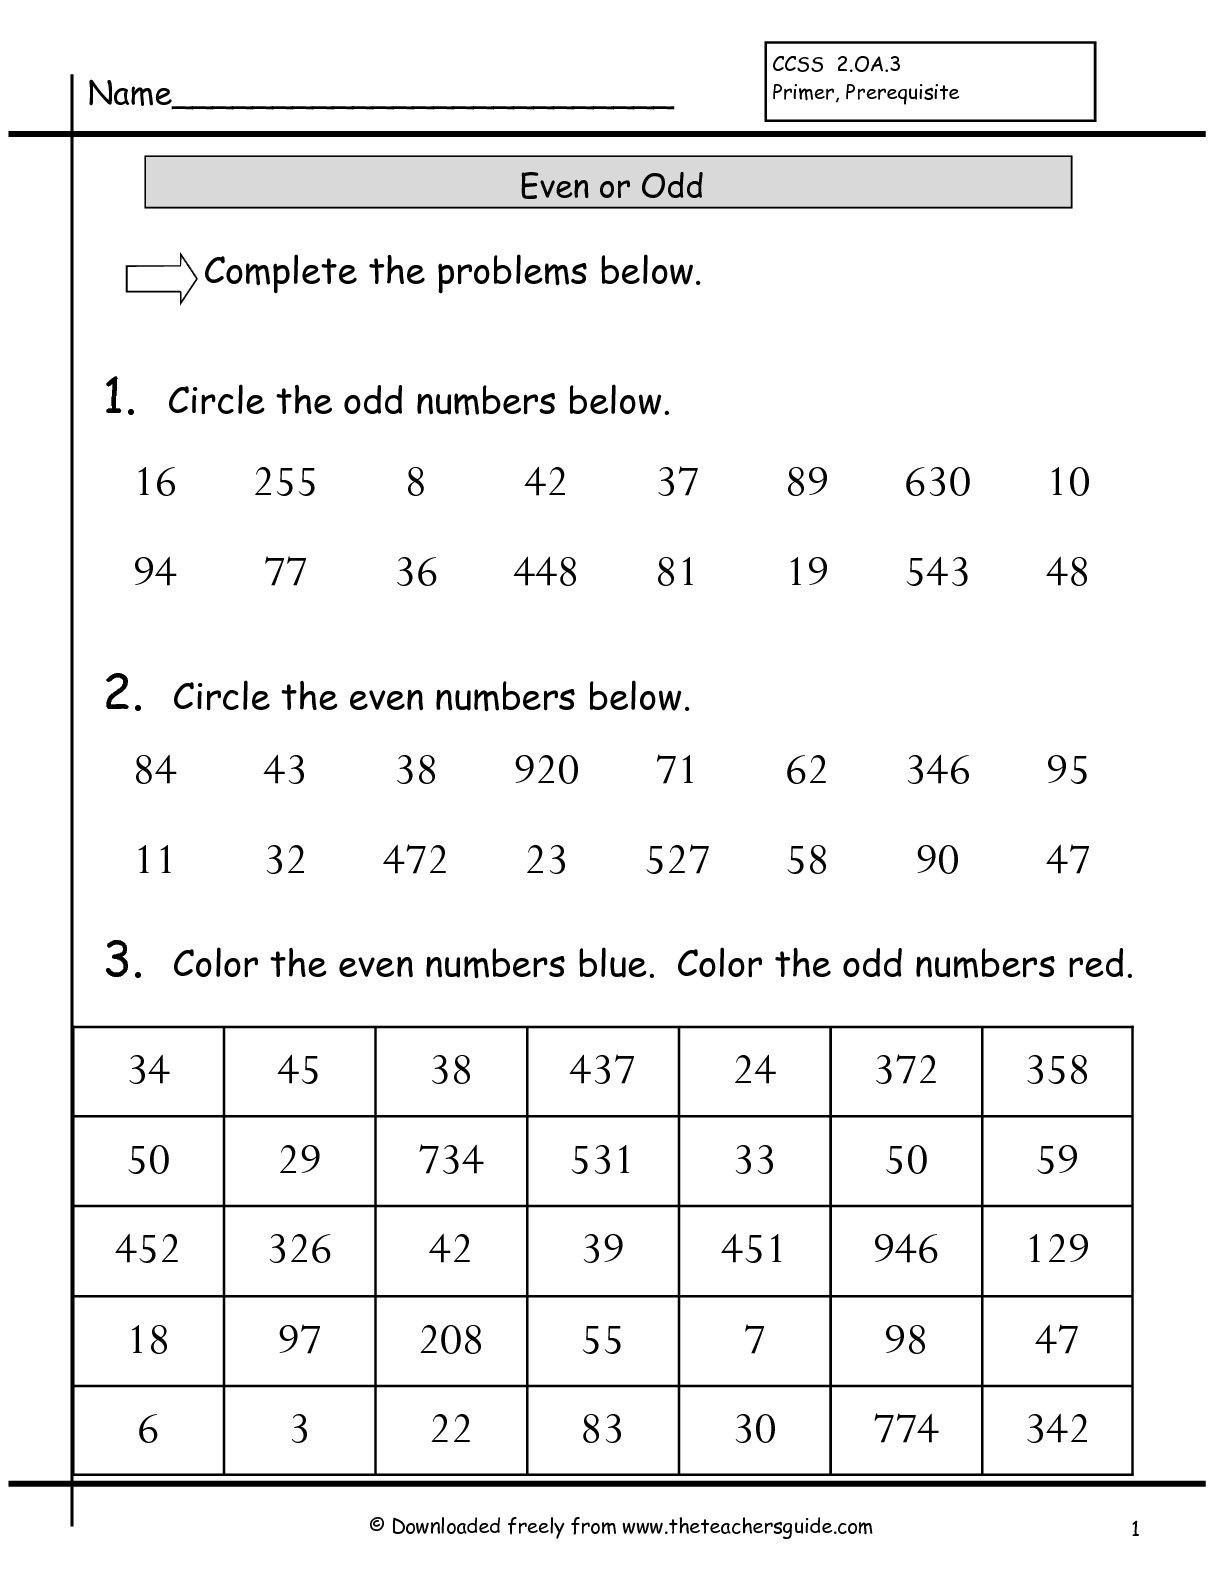 how to teach odd and even numbers to first grade odd and even numbers worksheets ks2 refrence math worksheets for grade 3 even and odd numbers